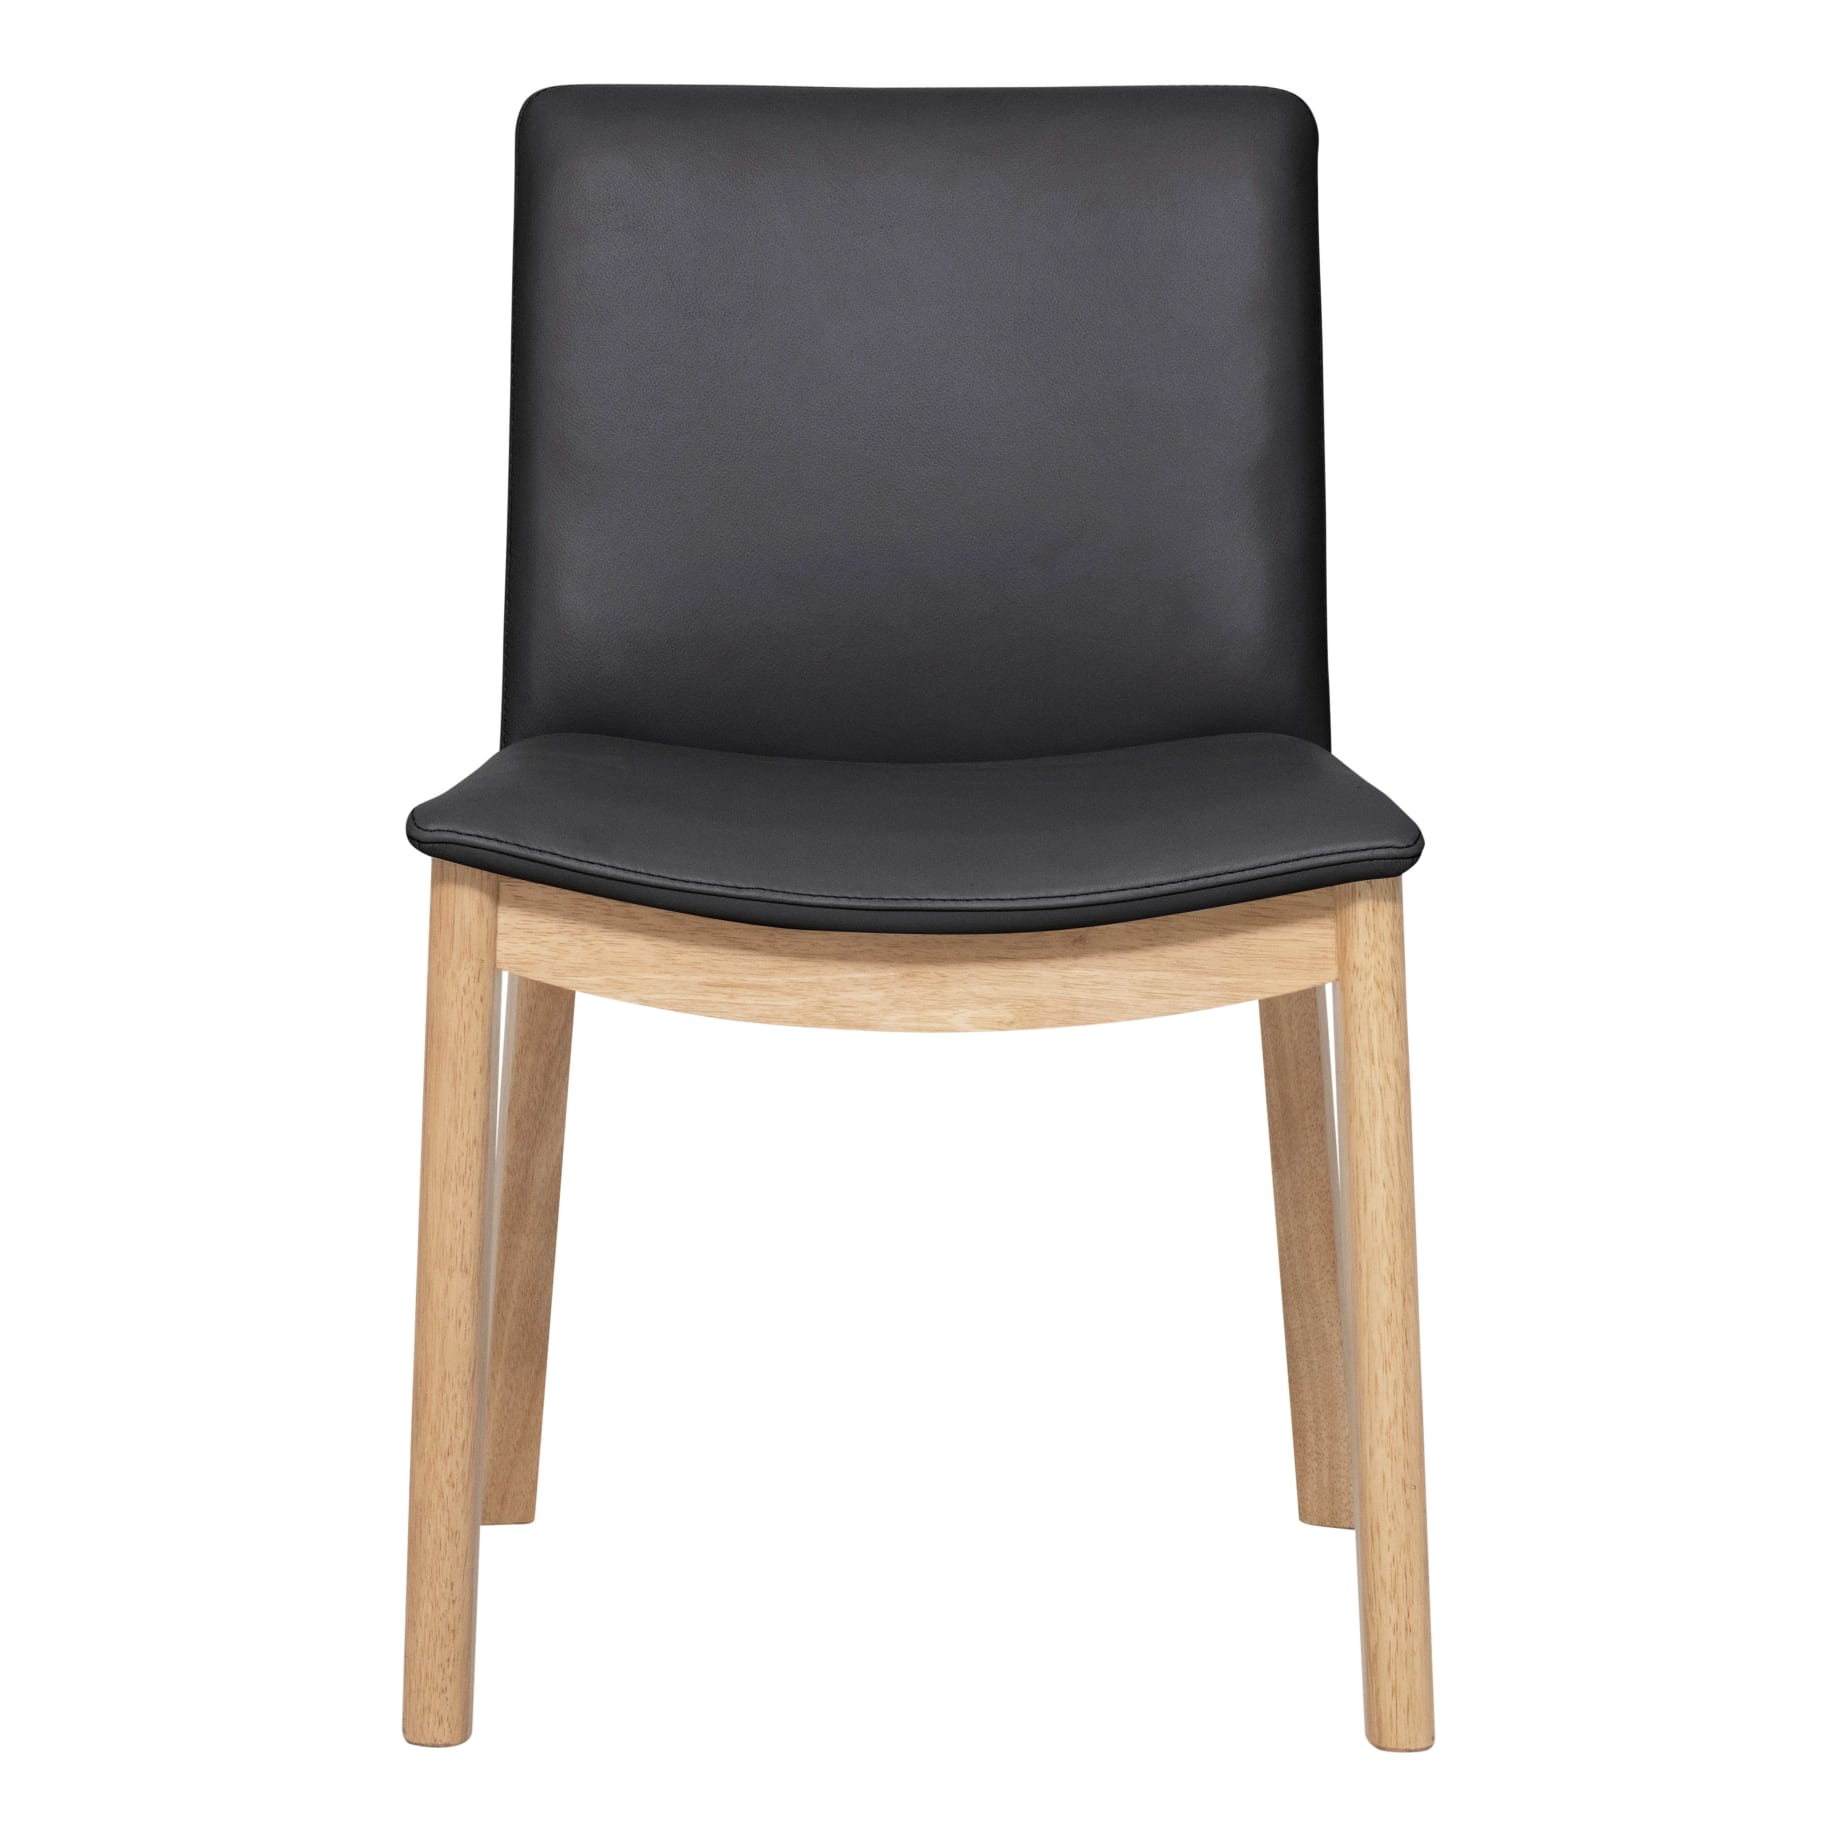 Everest Dining Chair in Black Leather / Oak Stain